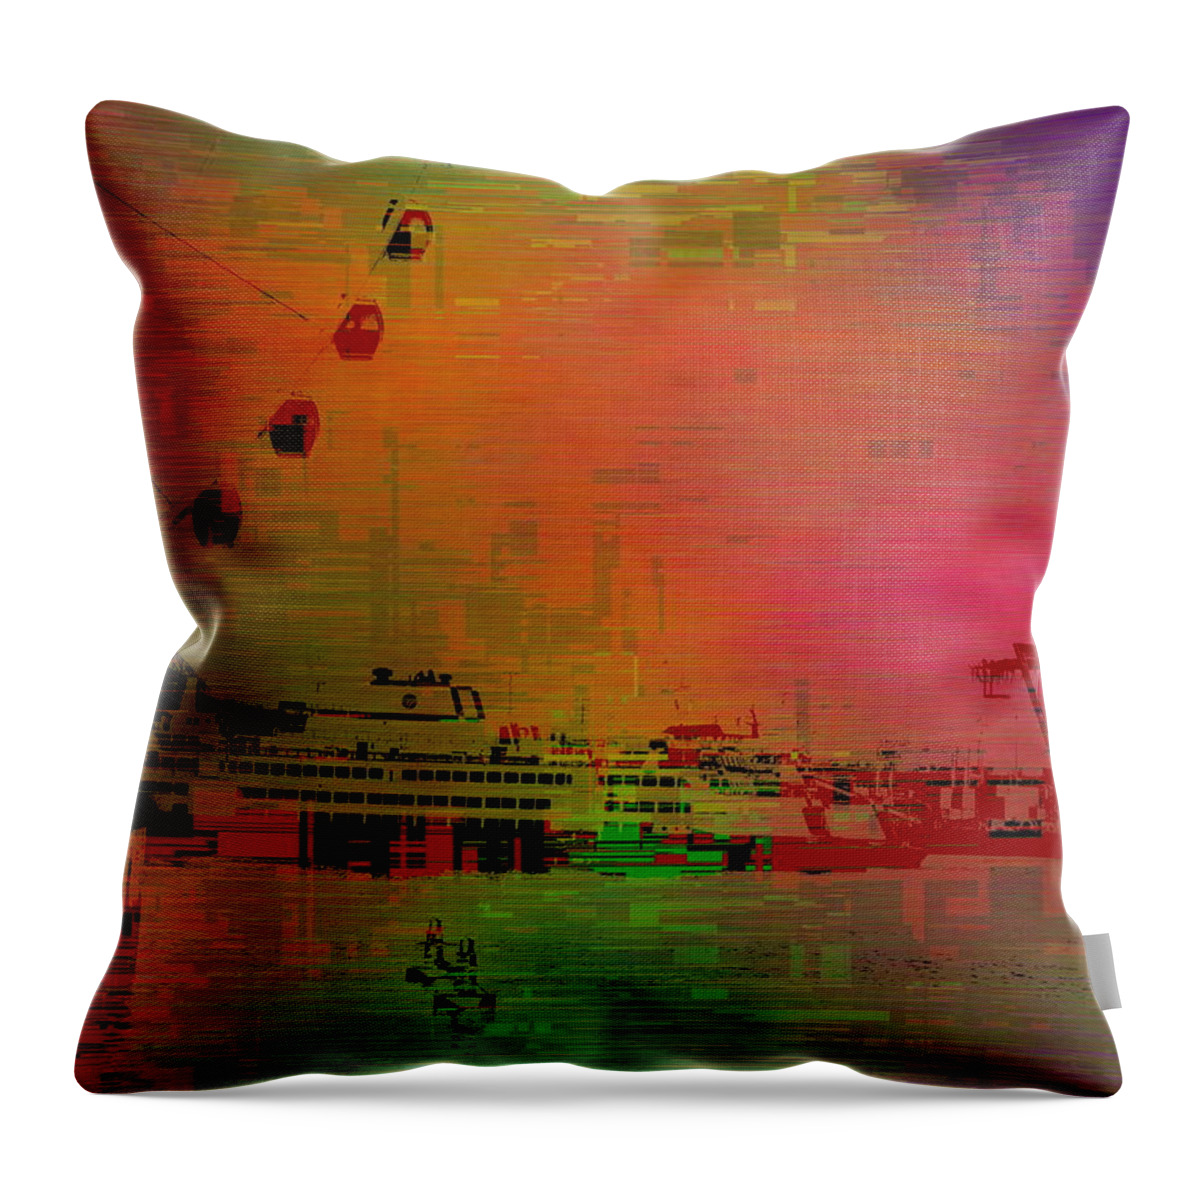 Abstract Throw Pillow featuring the digital art Elliott Bay Cubed by Tim Allen